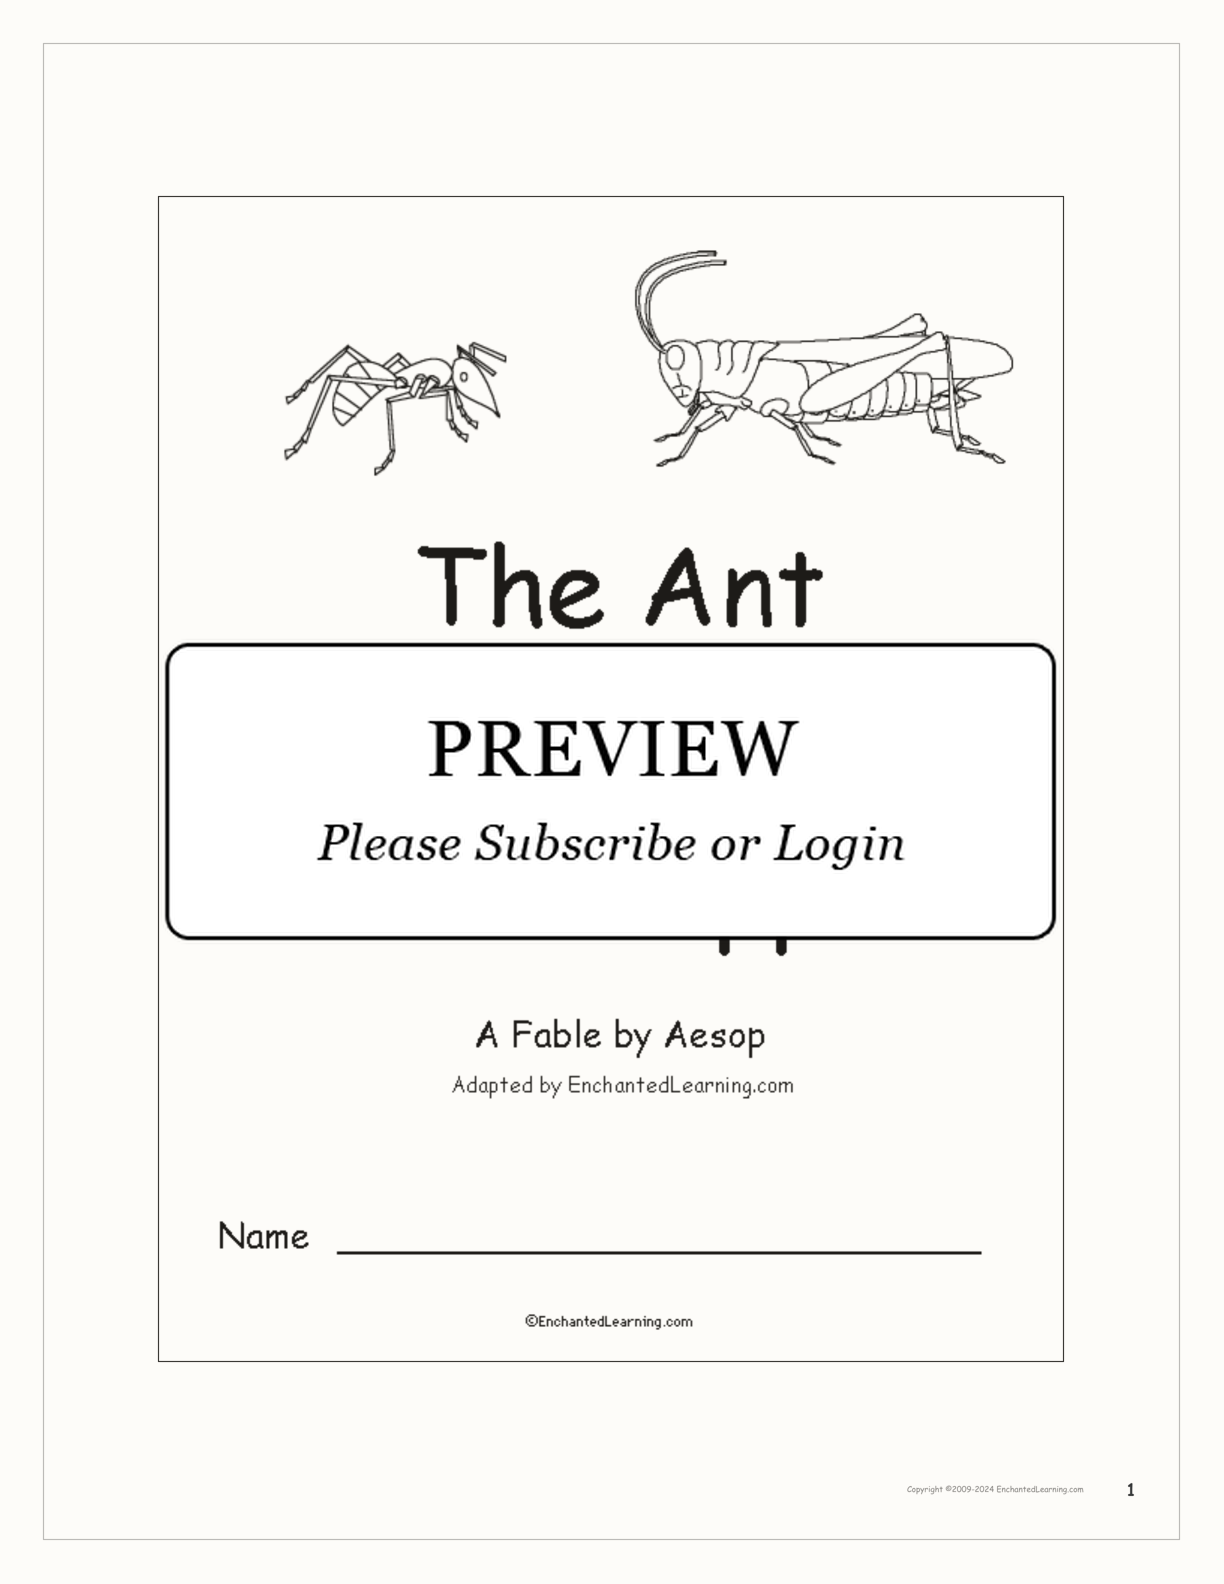 The Ant and the Grasshopper: An Aesop Fable interactive printout page 1